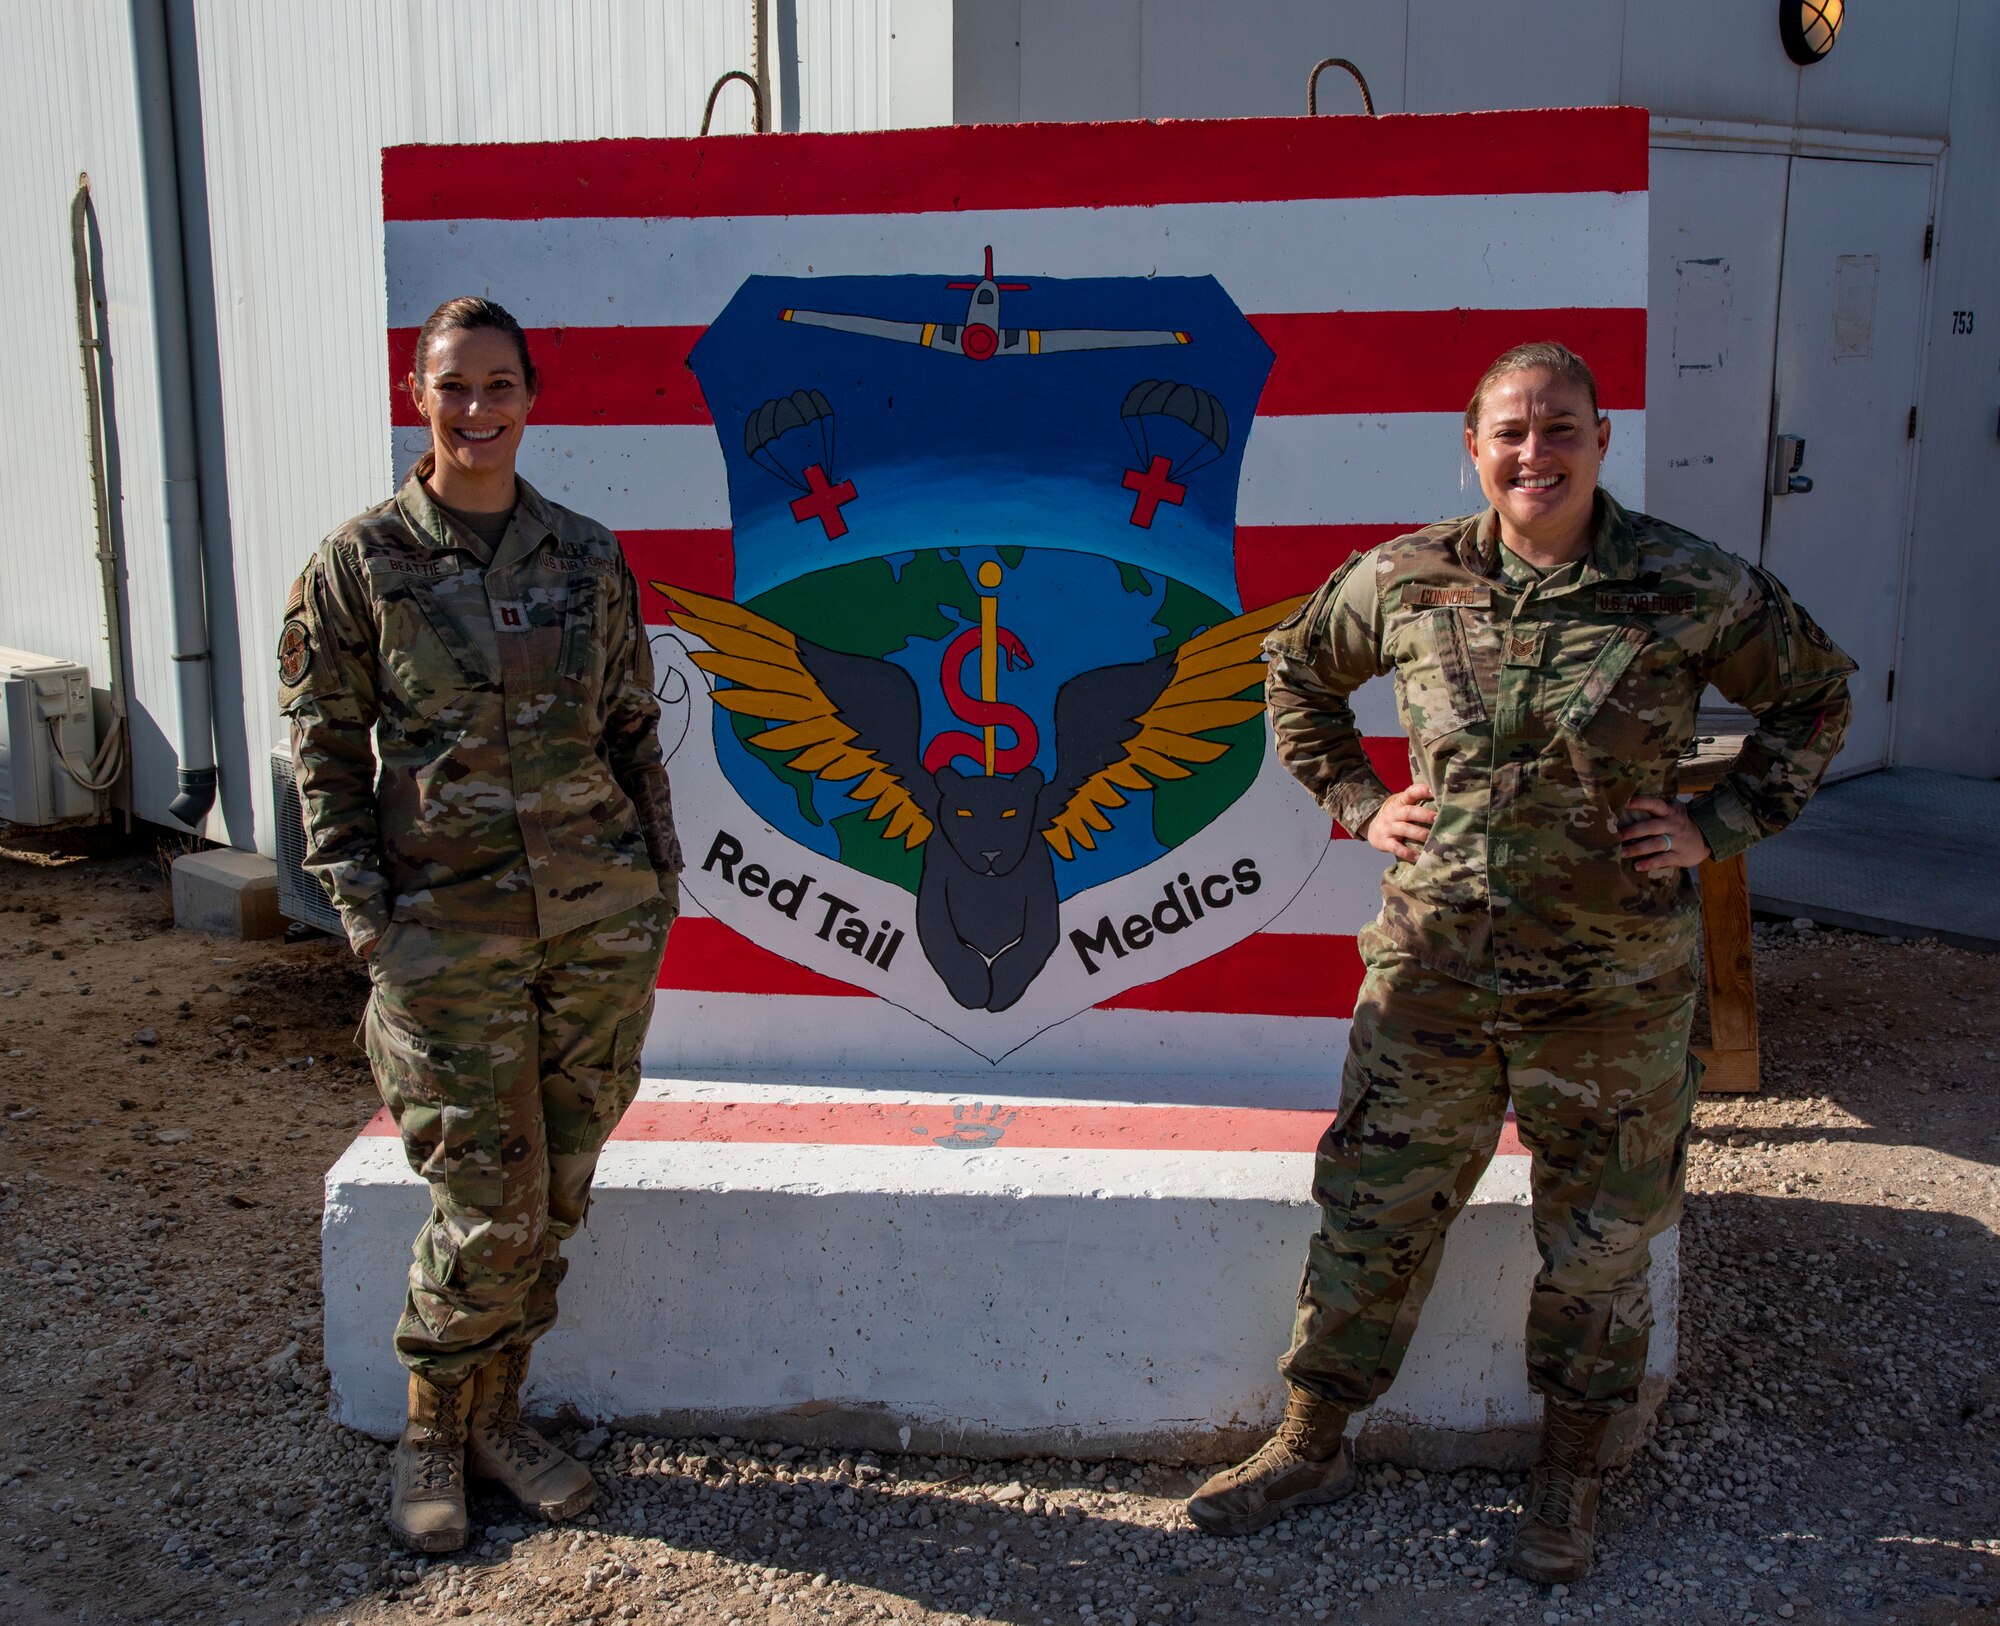 U.S. Air Force Capt. Suzan Beattie, 332d Expeditionary Medical Squadron and Tech. Sgt. Michelle Connors, mental health technician with the at an undisclosed location in Southwest Asia, Sept. 9, 2022. They are raising suicide awareness through the month of September at the 332d Air Expeditionary Squadron. (U.S. Air Force photo by: Tech. Sgt. Jim Bentley)